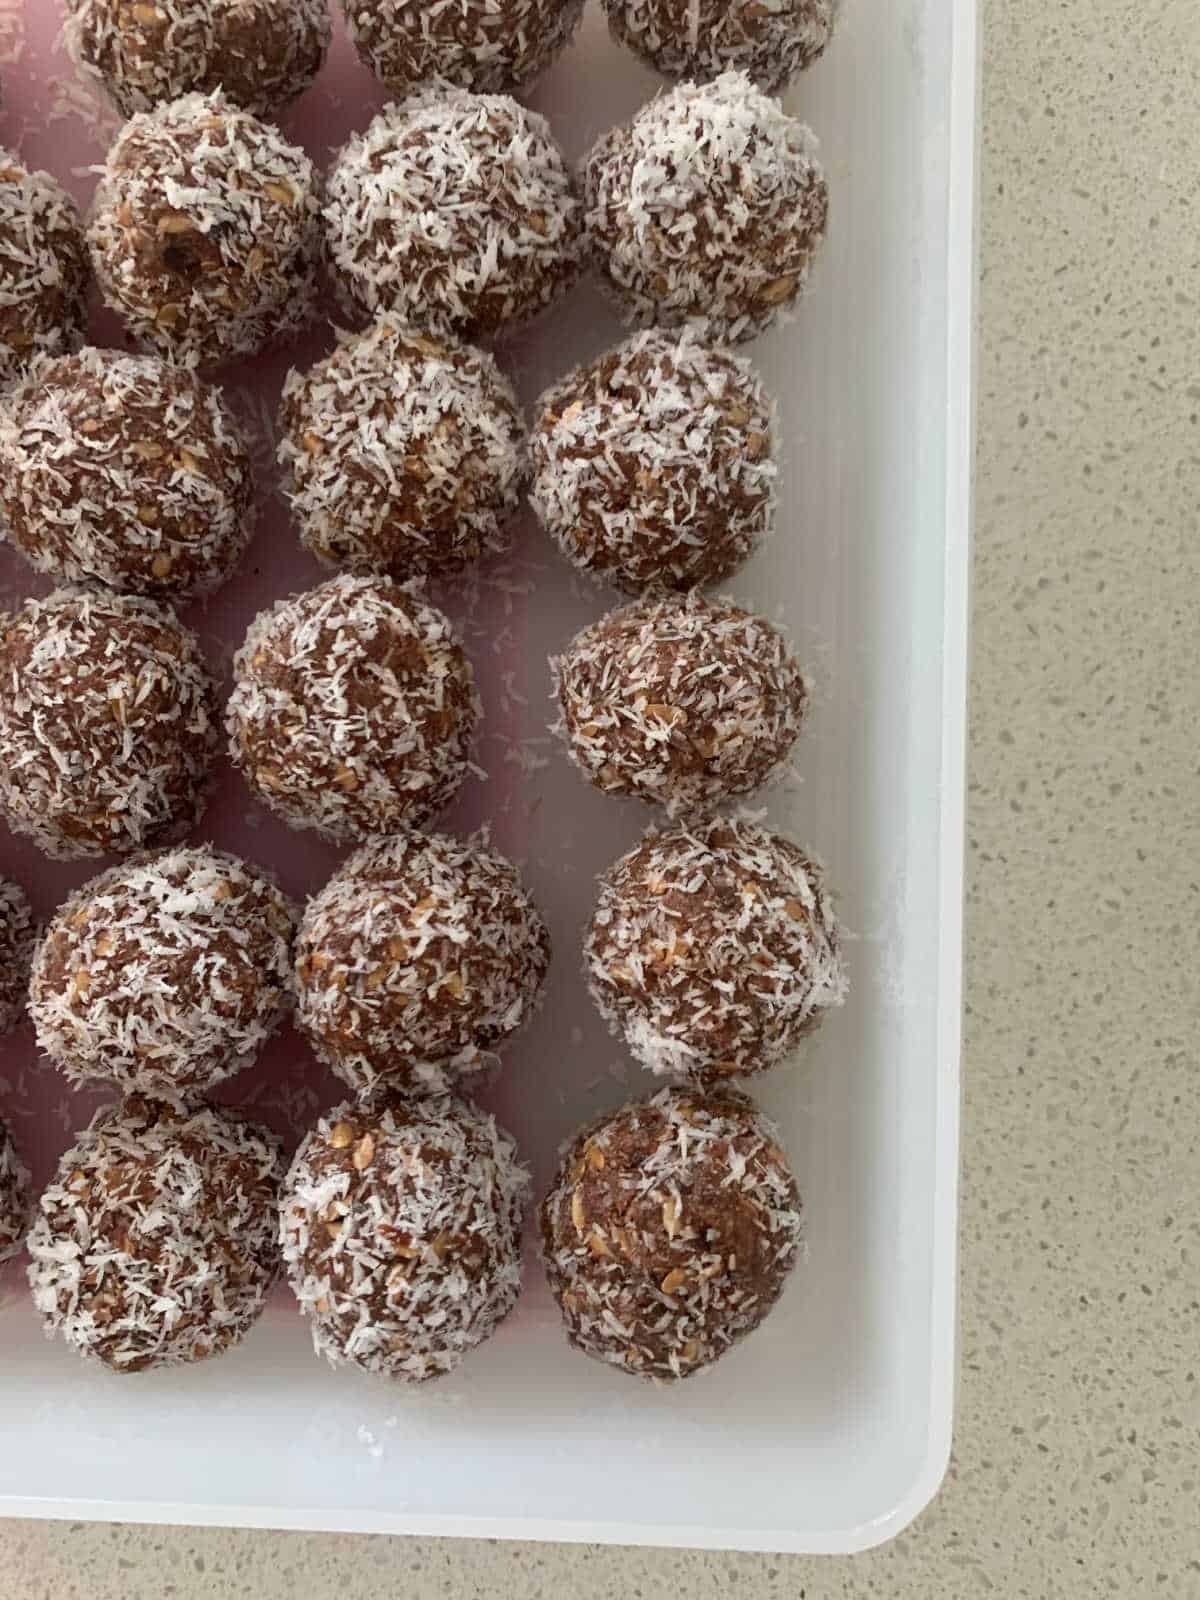 protein balls in a container